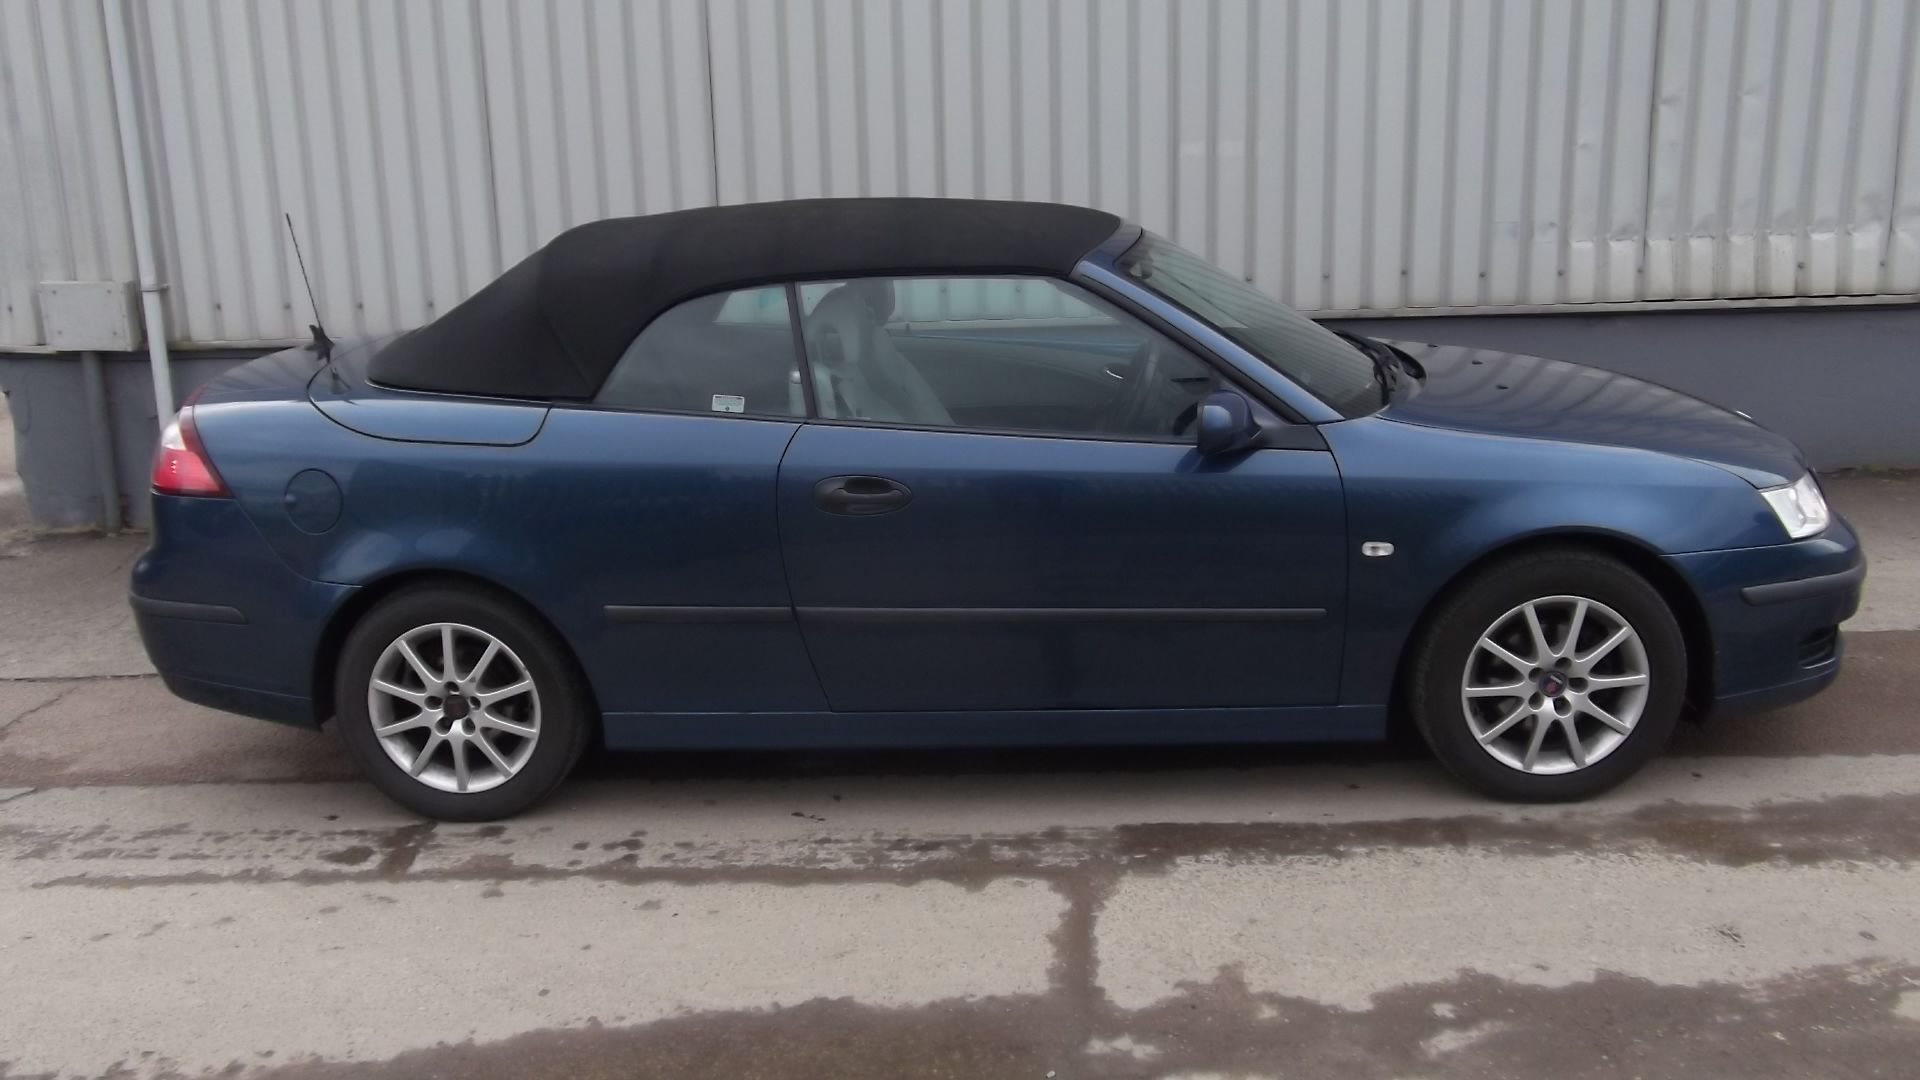 2006 Saab 9-3 Linear 150 Bhp 2.0 3Dr Convertible - FSH - CL505 - NO VAT ON THE HAMM - Image 7 of 19